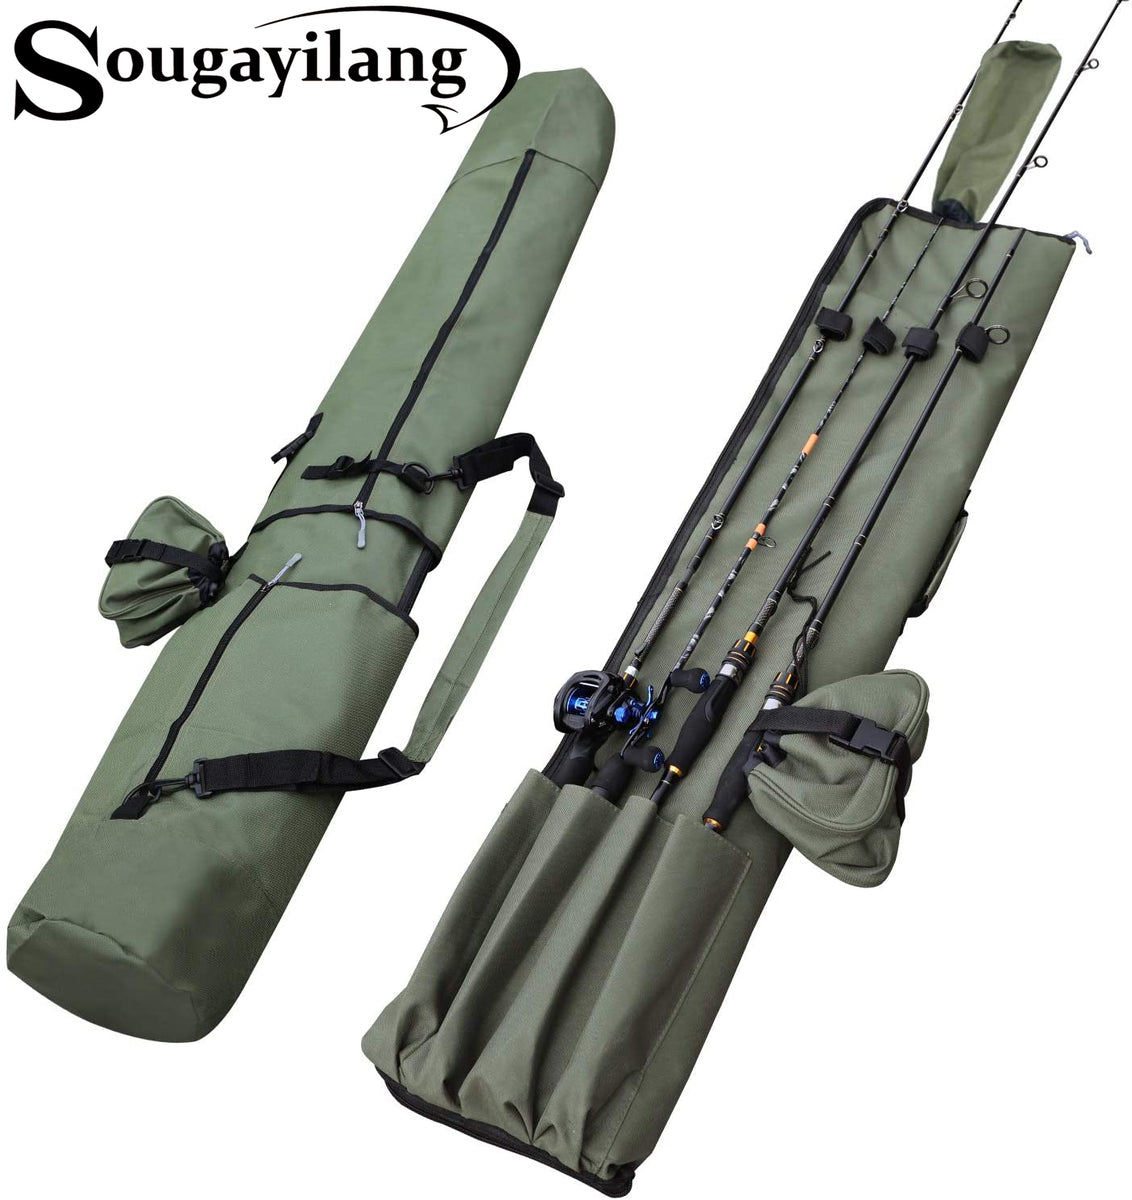 Sougayilang Fishing Rod Bag Canvas Rod Case Organizer Pole Storage Bag  Fishing Rod and Reel Carrier Organizer for Travel, Gift for Father,  Boyfriend